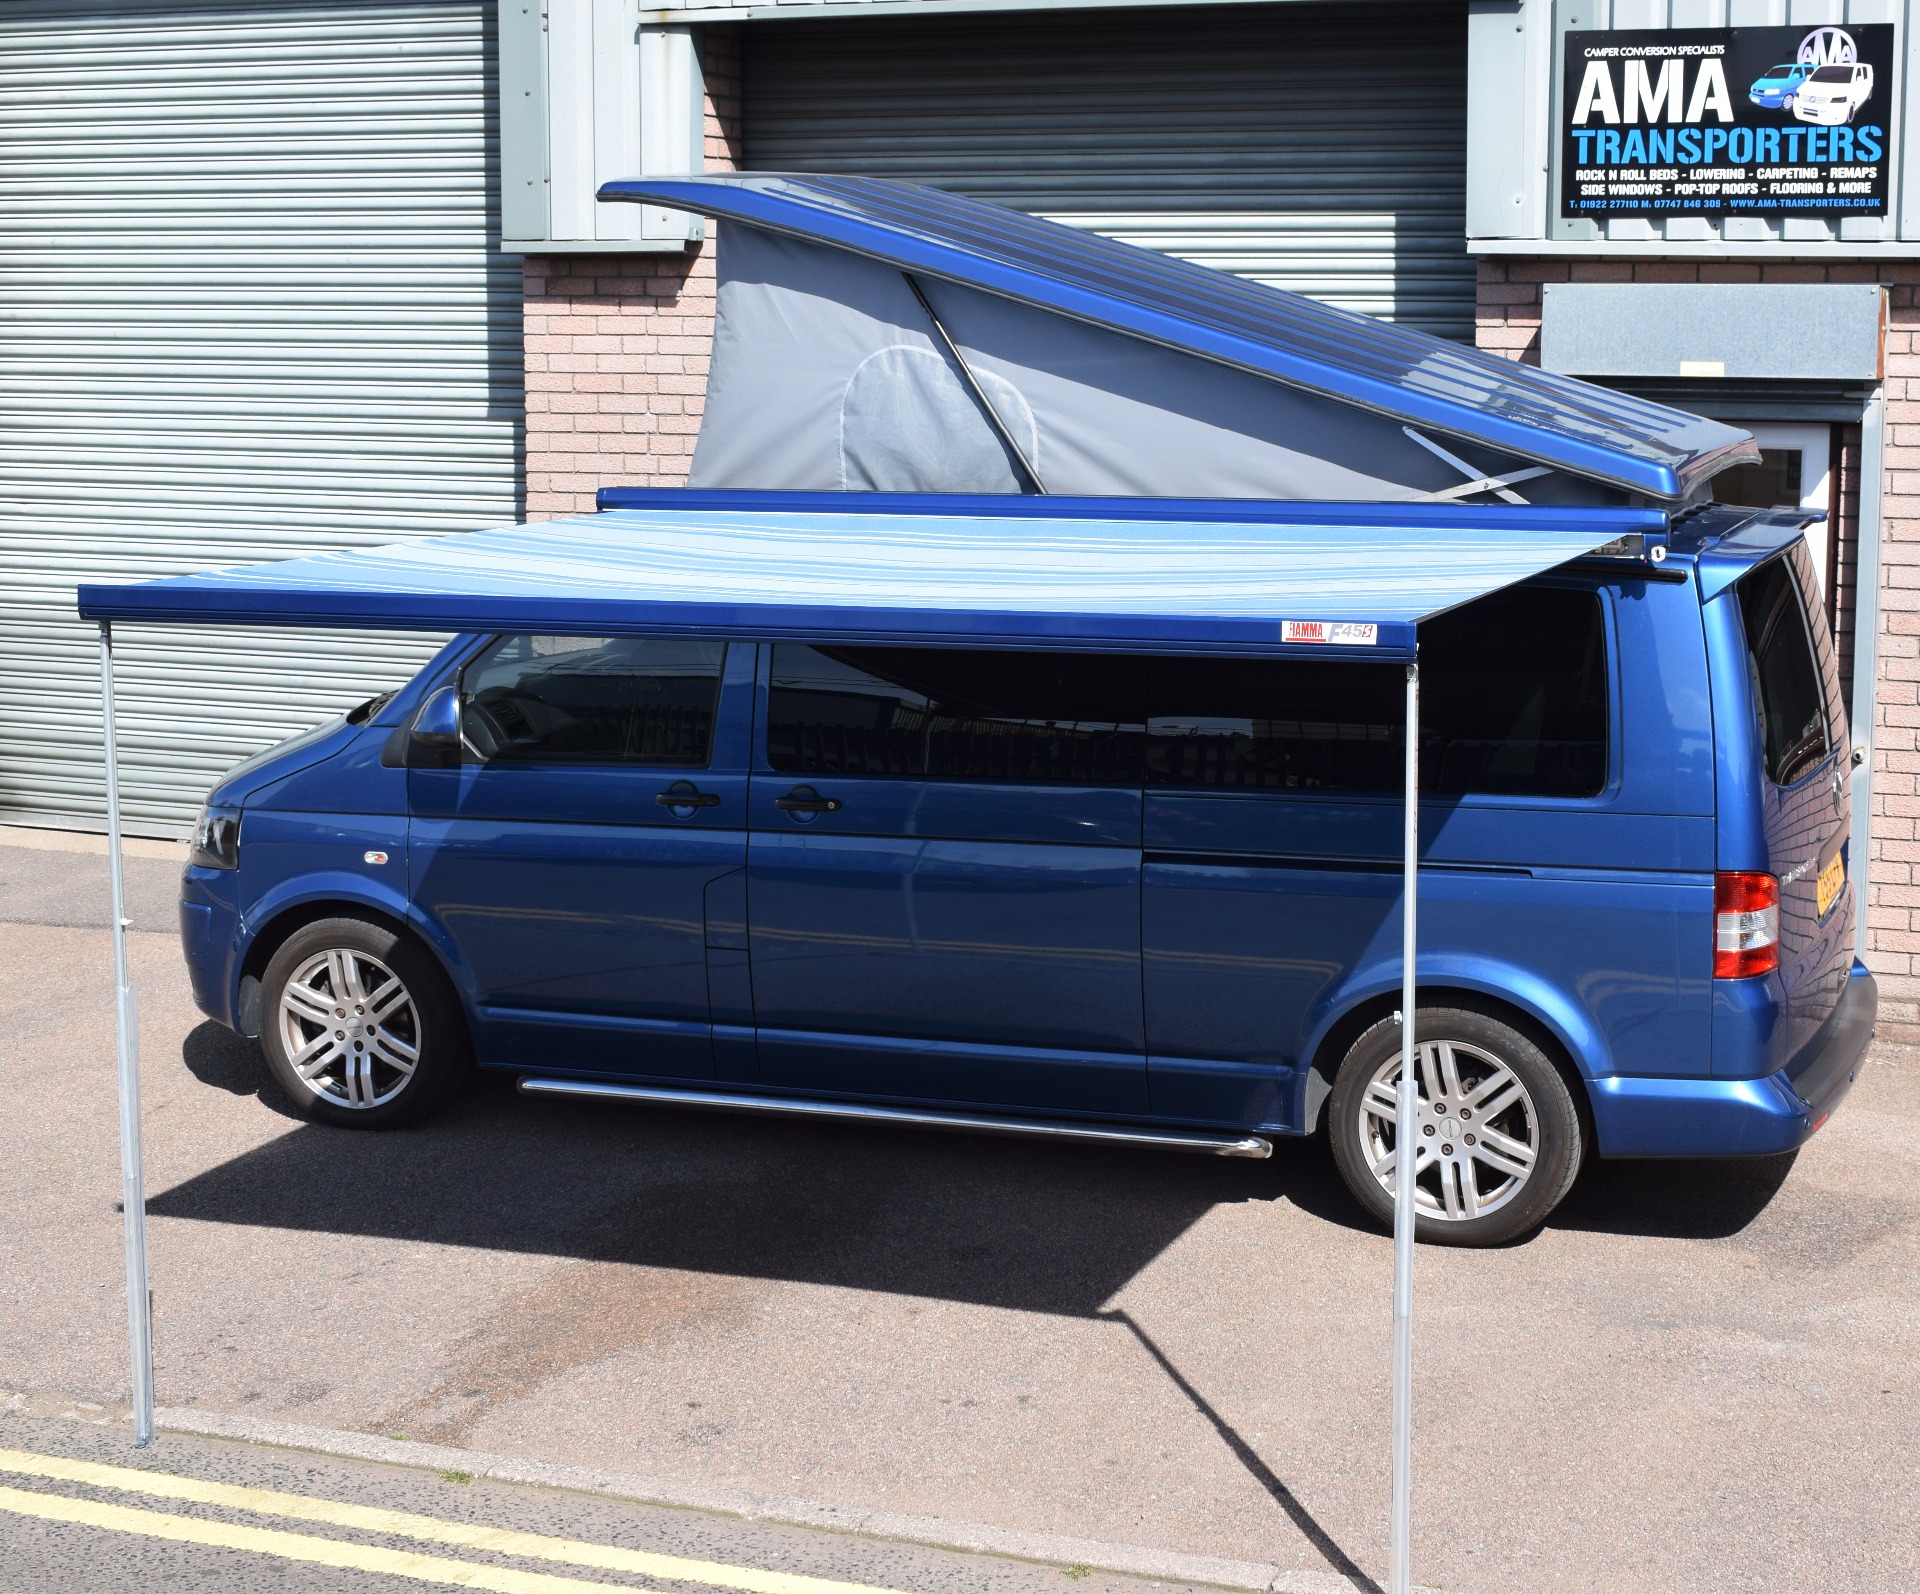 With Fiamma F45s awning and Austop Elevating roof.